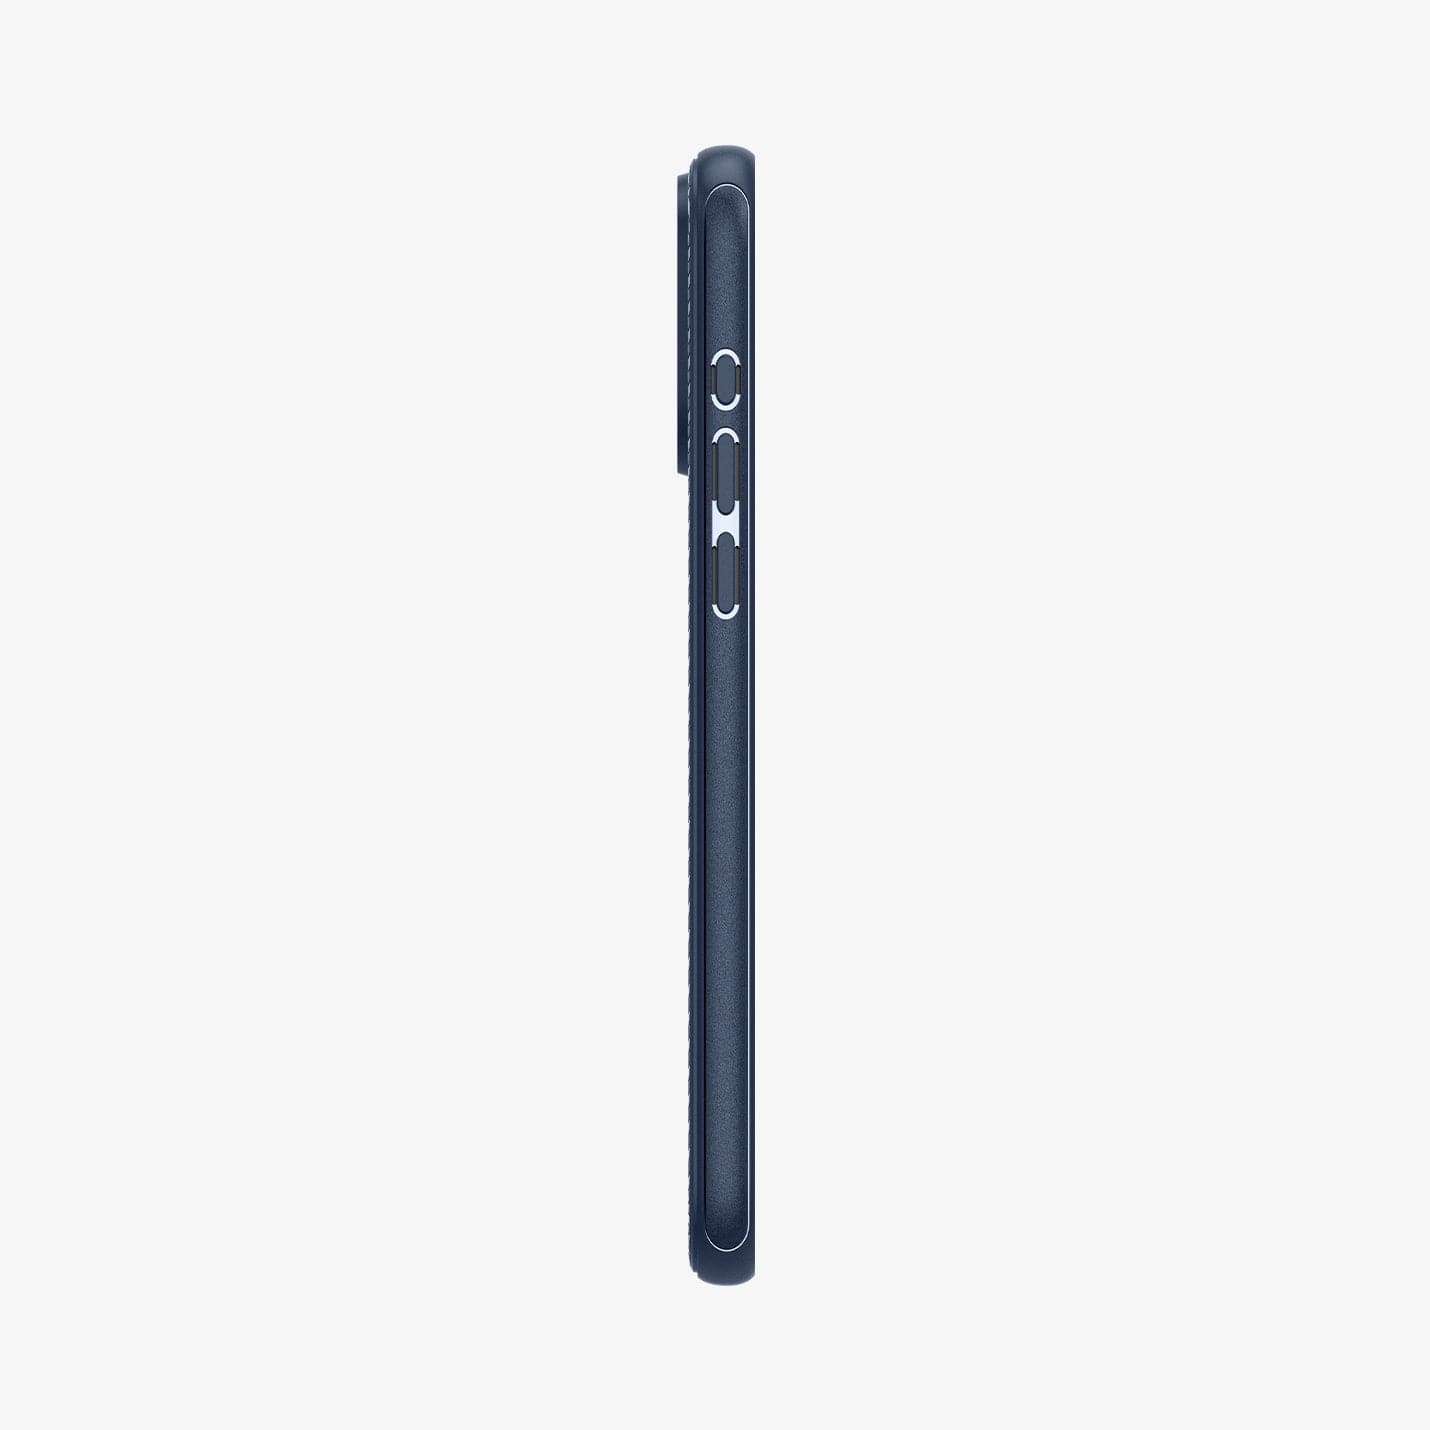 ACS06737 - iPhone 15 Pro Case Mag Armor (MagFit) in navy blue showing the side